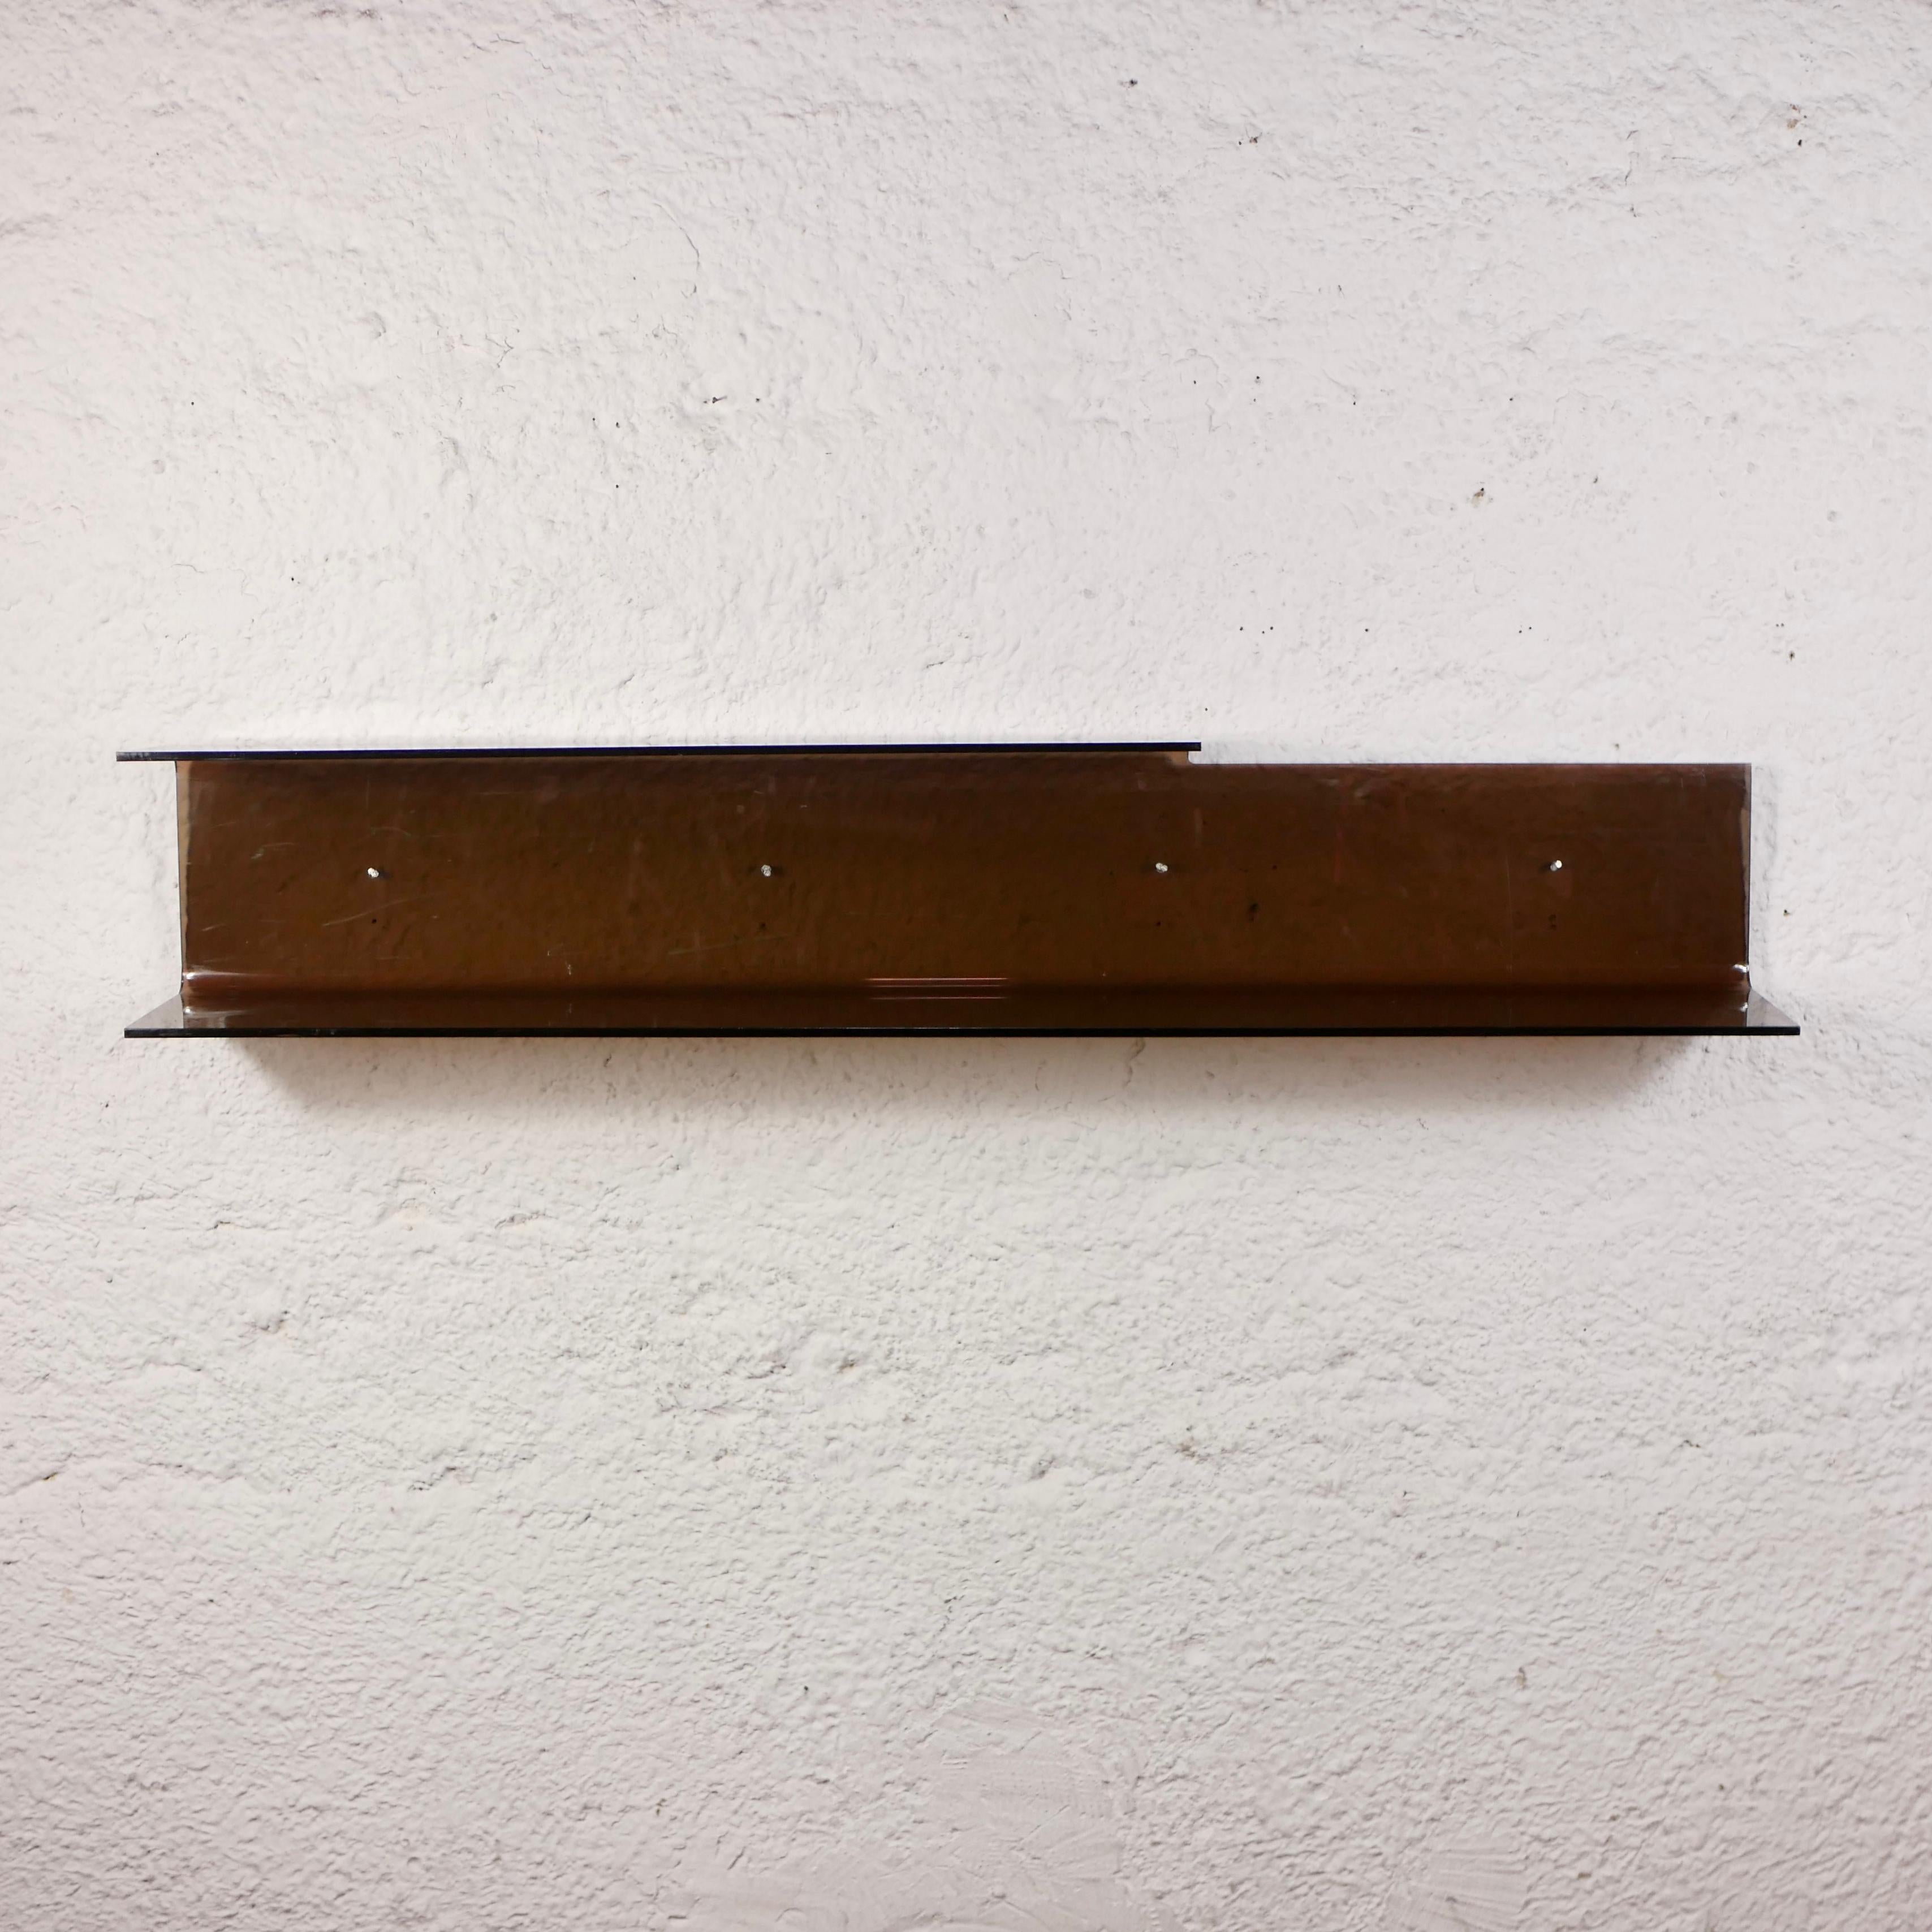 Late 20th Century Large Smoked Plexi Wall Shelf from the 1970s